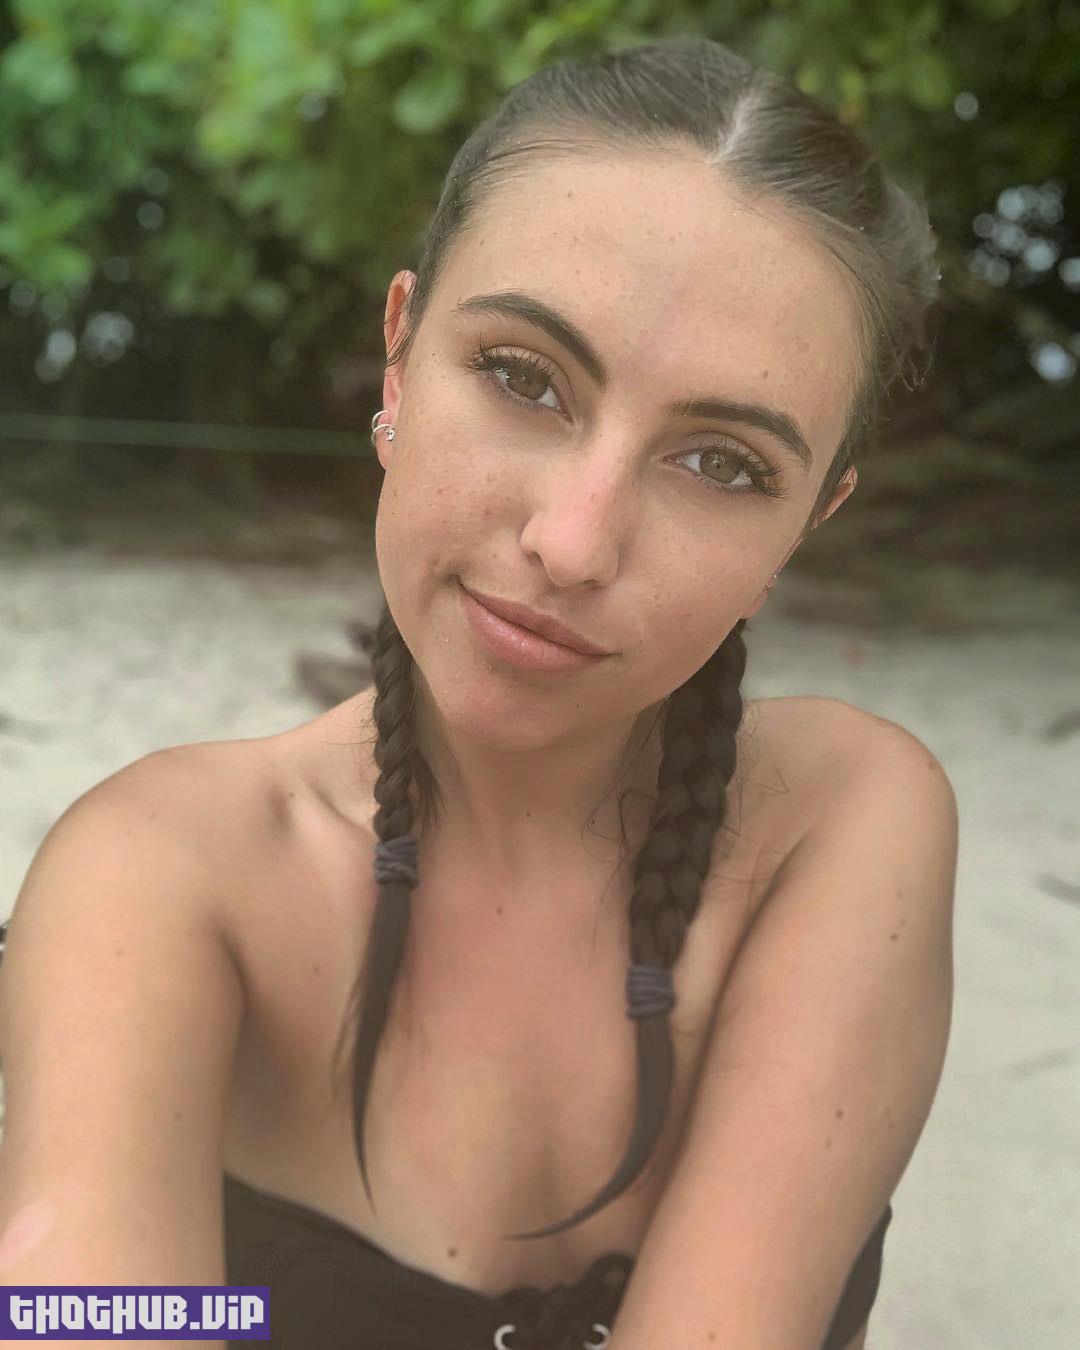 Danielle Andrade nude photos leaked The Fappening 2019